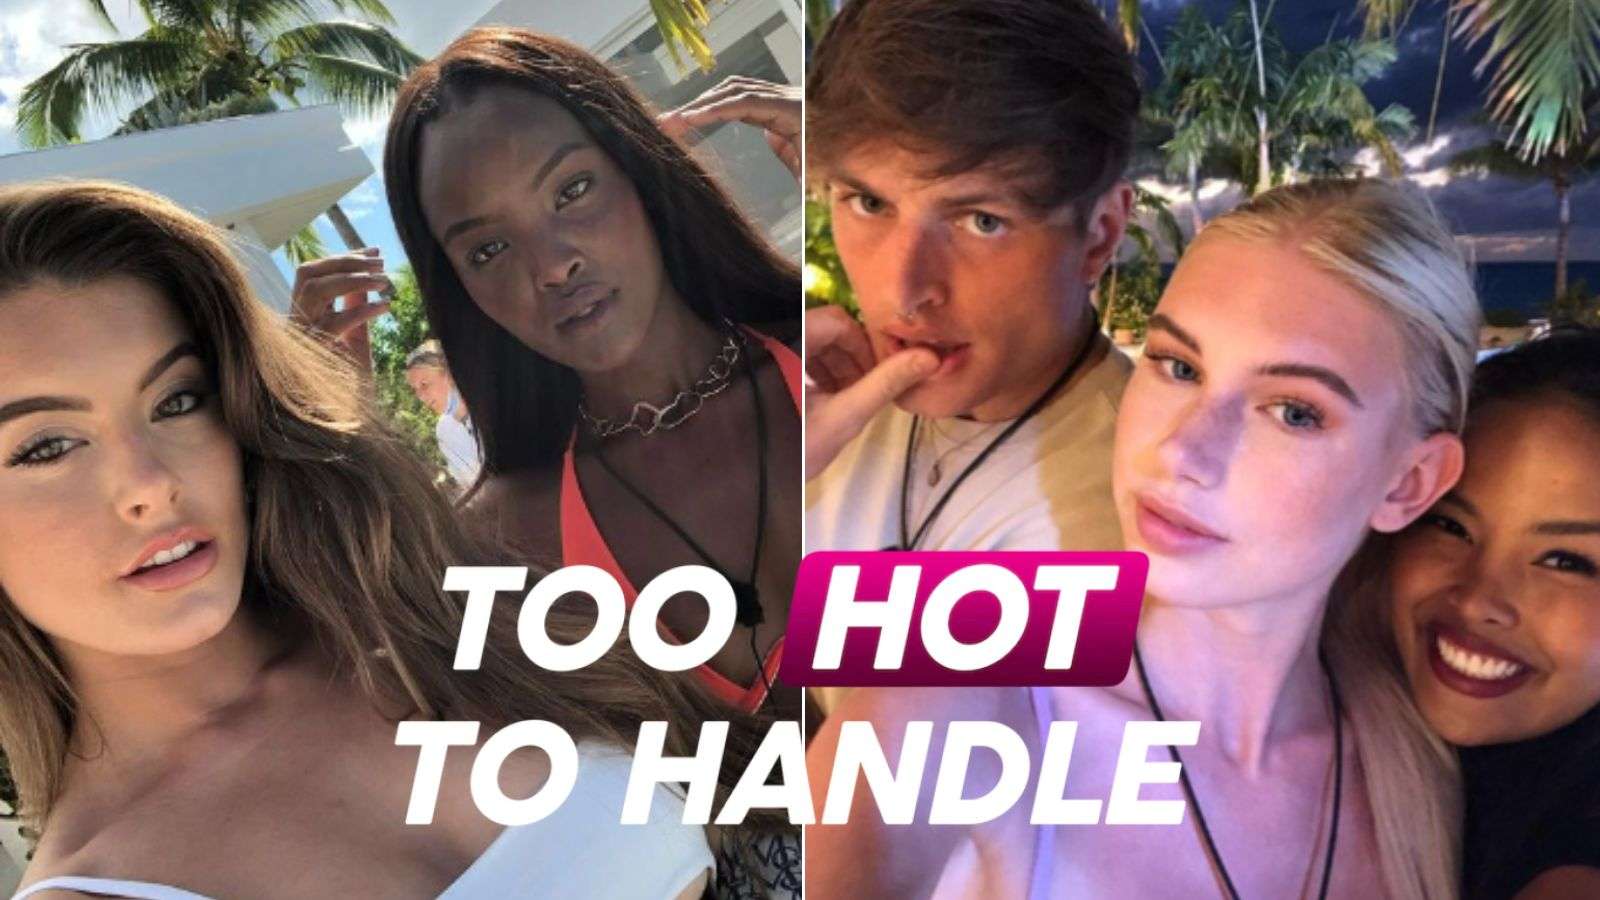 The Season 4 cast of Too Hot To Handle